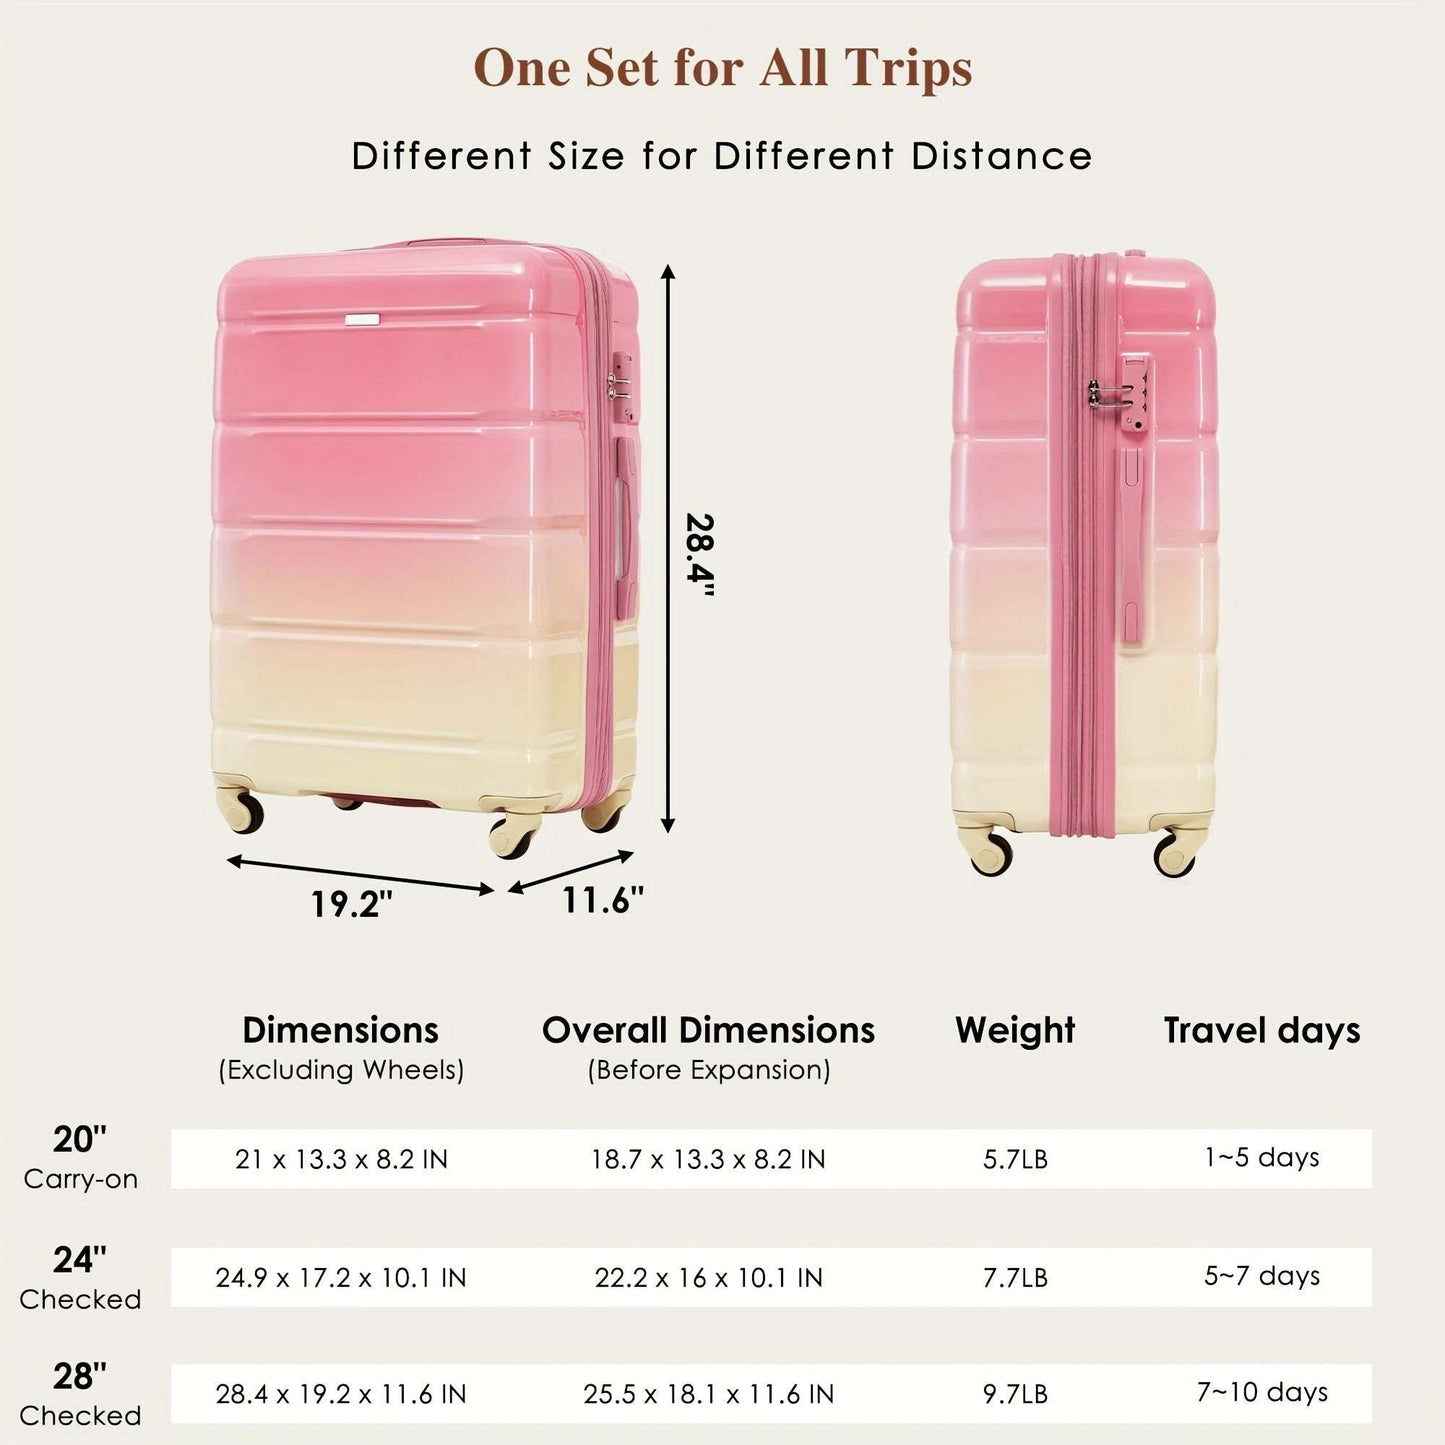 Gradient Color Luggage Set of 3, 28", 24", 20-inch with USB Port, Airline Certified Carry-on Luggage with Cup Holder 156 Luggage OK•PhotoFineArt OK•PhotoFineArt